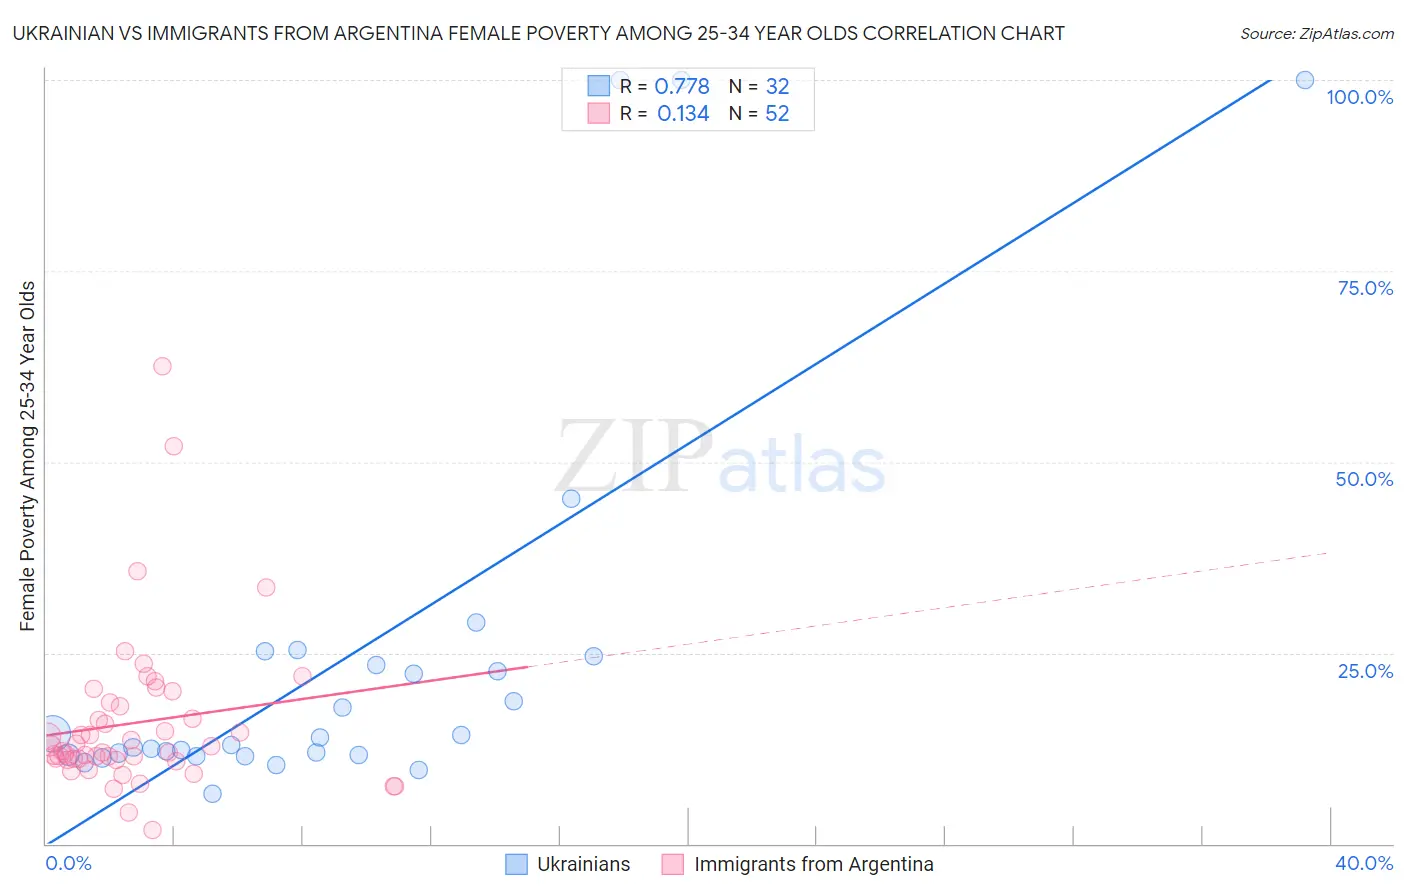 Ukrainian vs Immigrants from Argentina Female Poverty Among 25-34 Year Olds